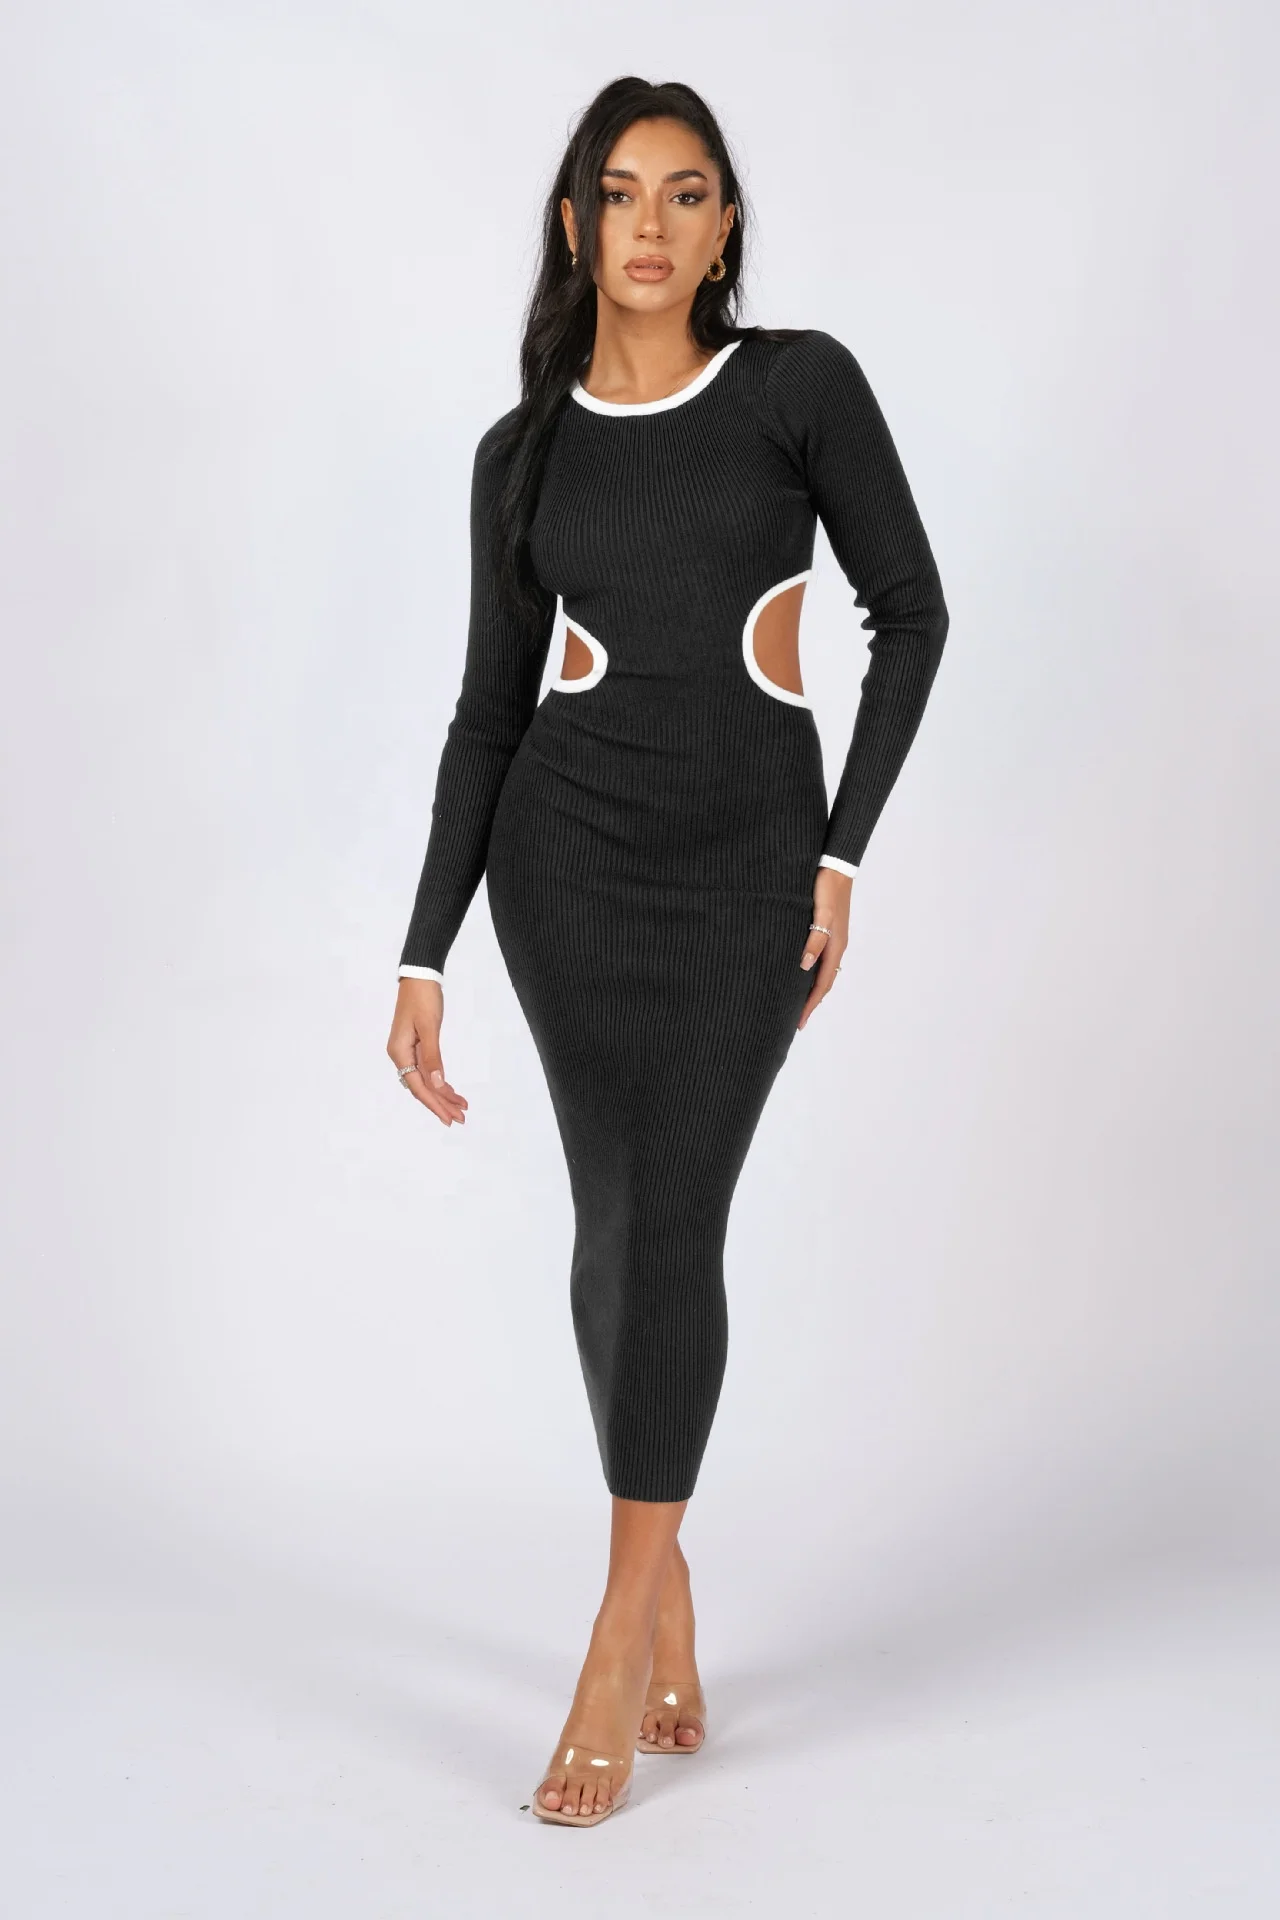 2023 new arrival Hip Wrap Rib Sexy Featured Backless Dress Knit wear Body con solid long sleeve winter dress